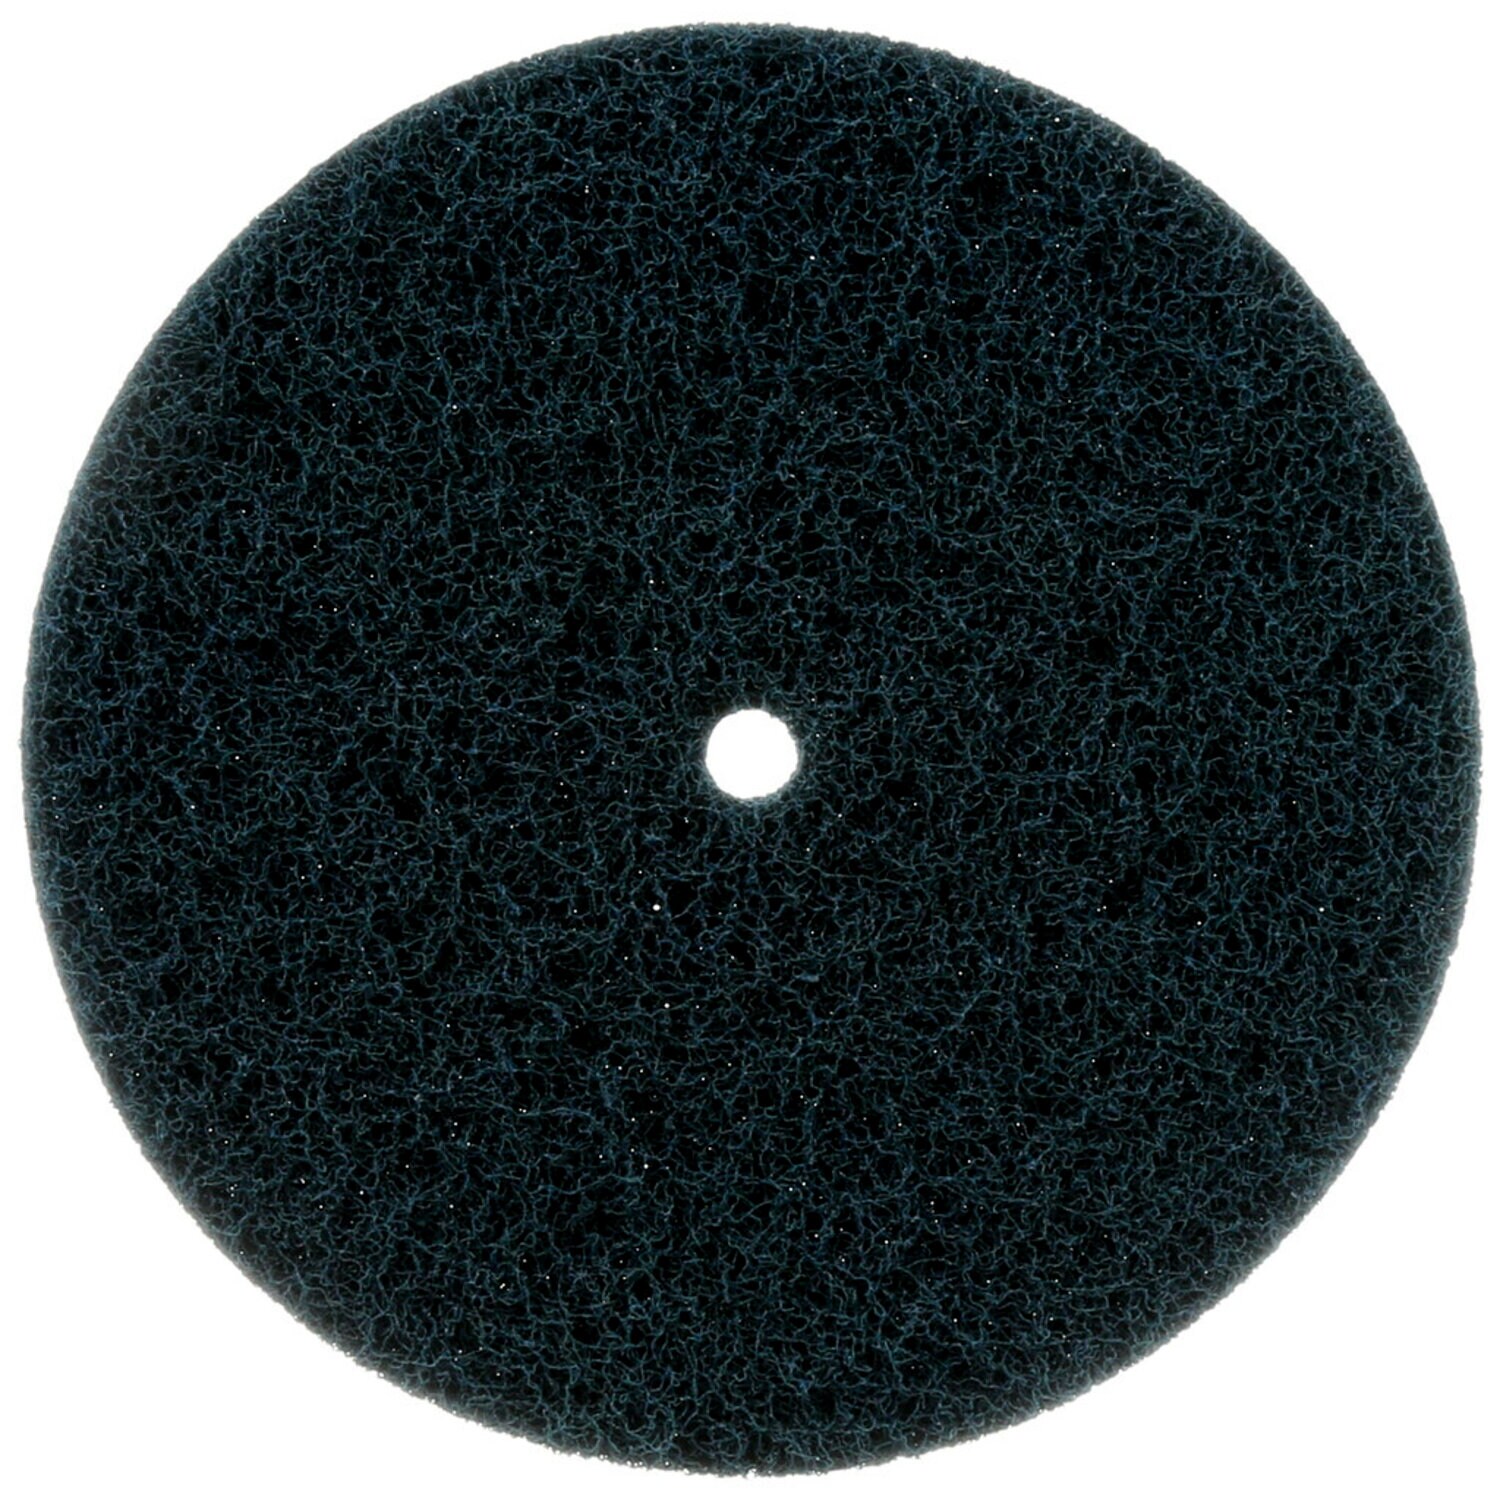 7010310117 - Standard Abrasives Buff and Blend HS Disc, 819910, 8 in x 1-1/4 in A
MED, 10/Pac, 100 ea/Case